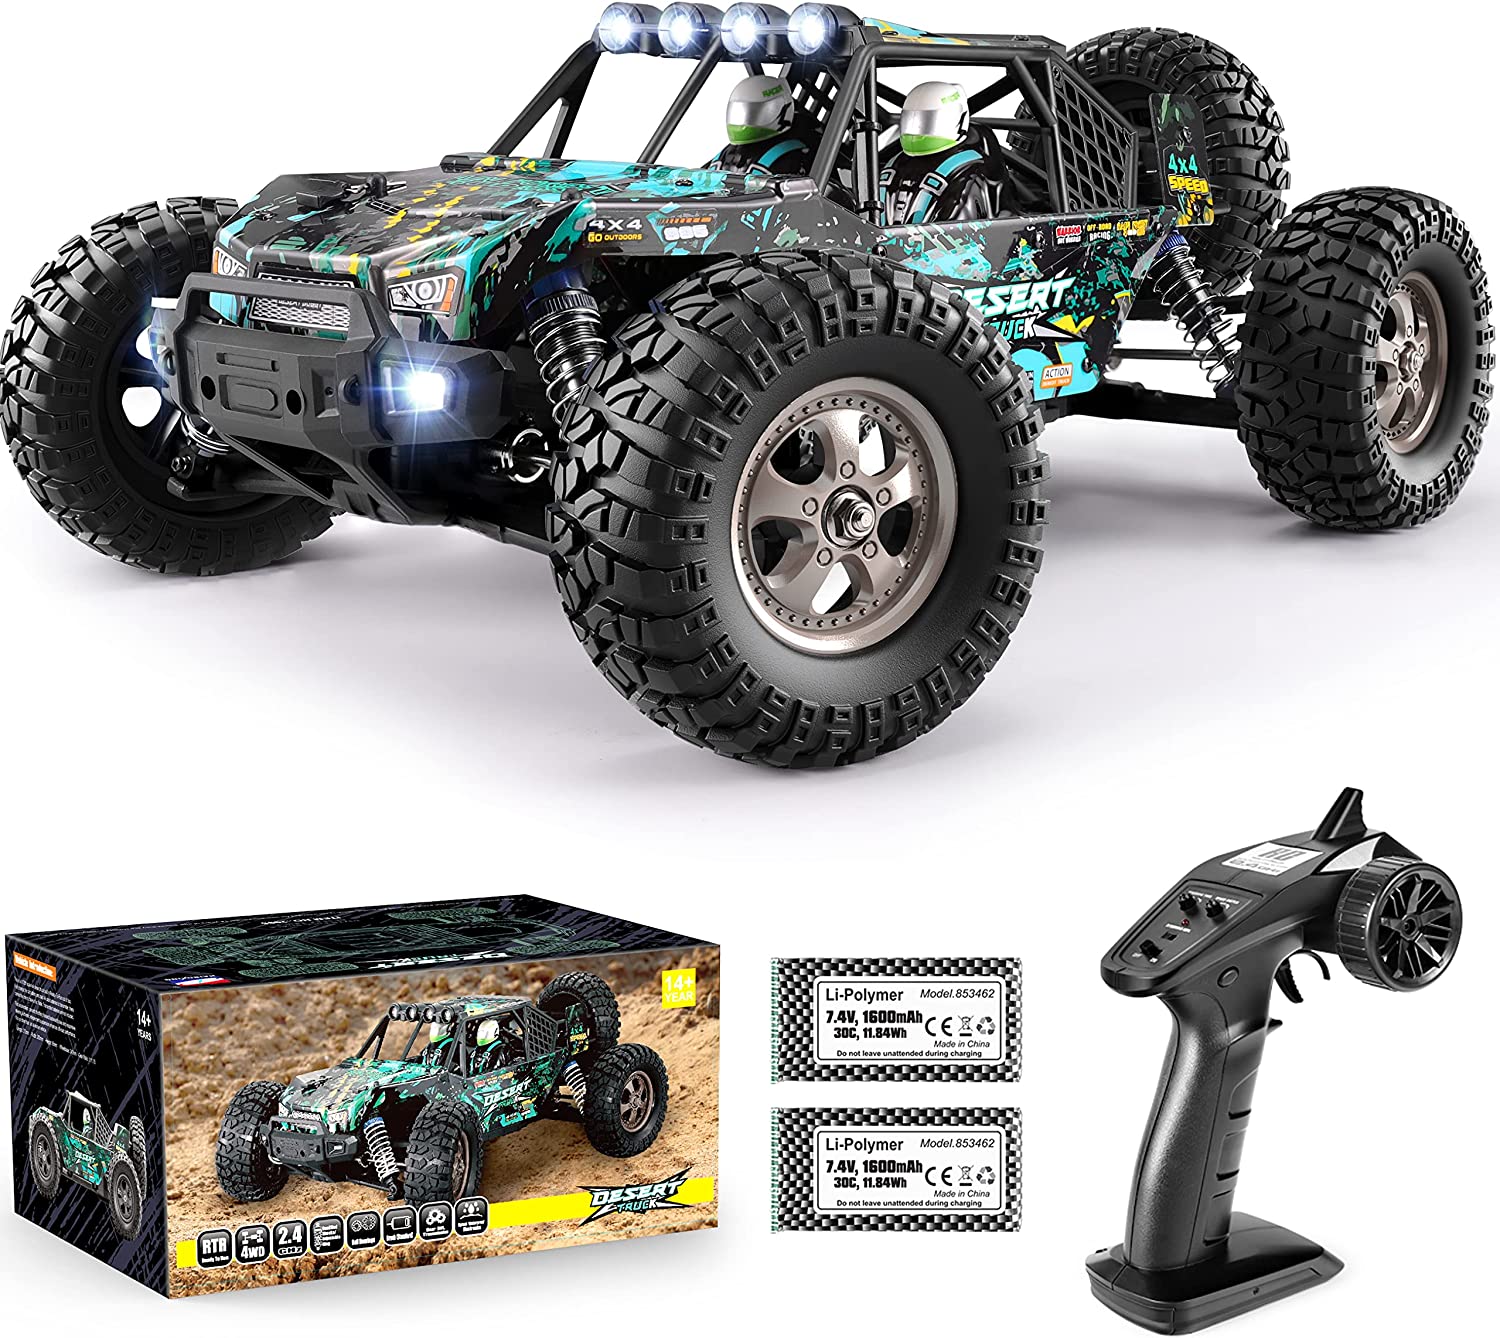 What are some tips for racing an RC buggy?